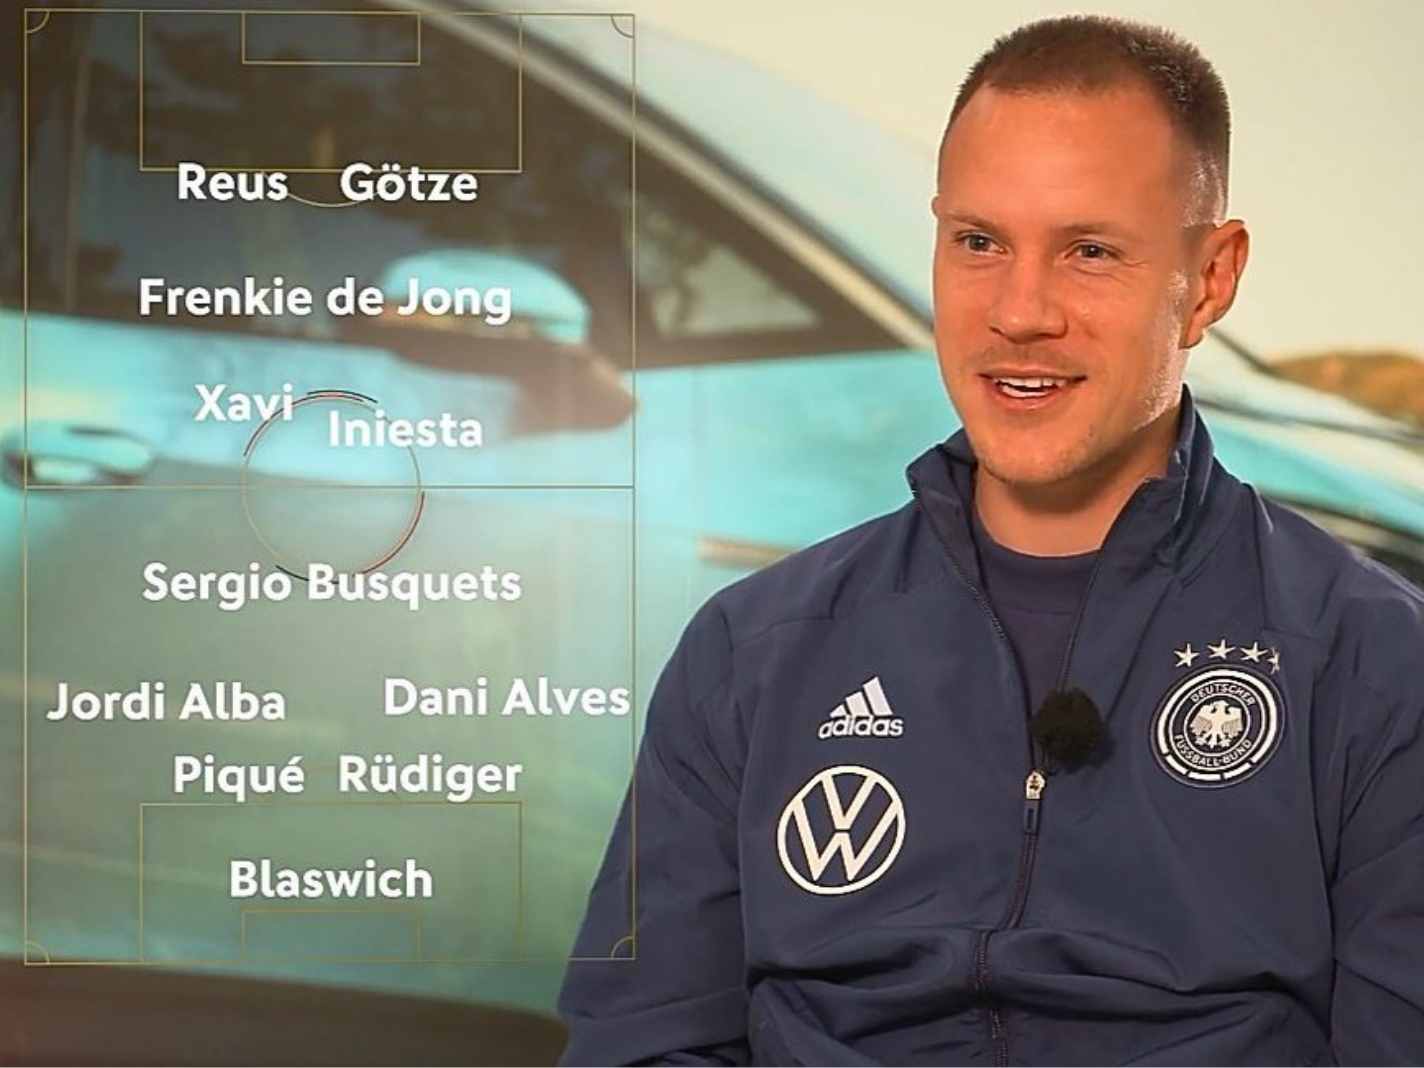 Marc-Andre Ter Stegen shocked fans with the choice of players in his Dream XI lineup